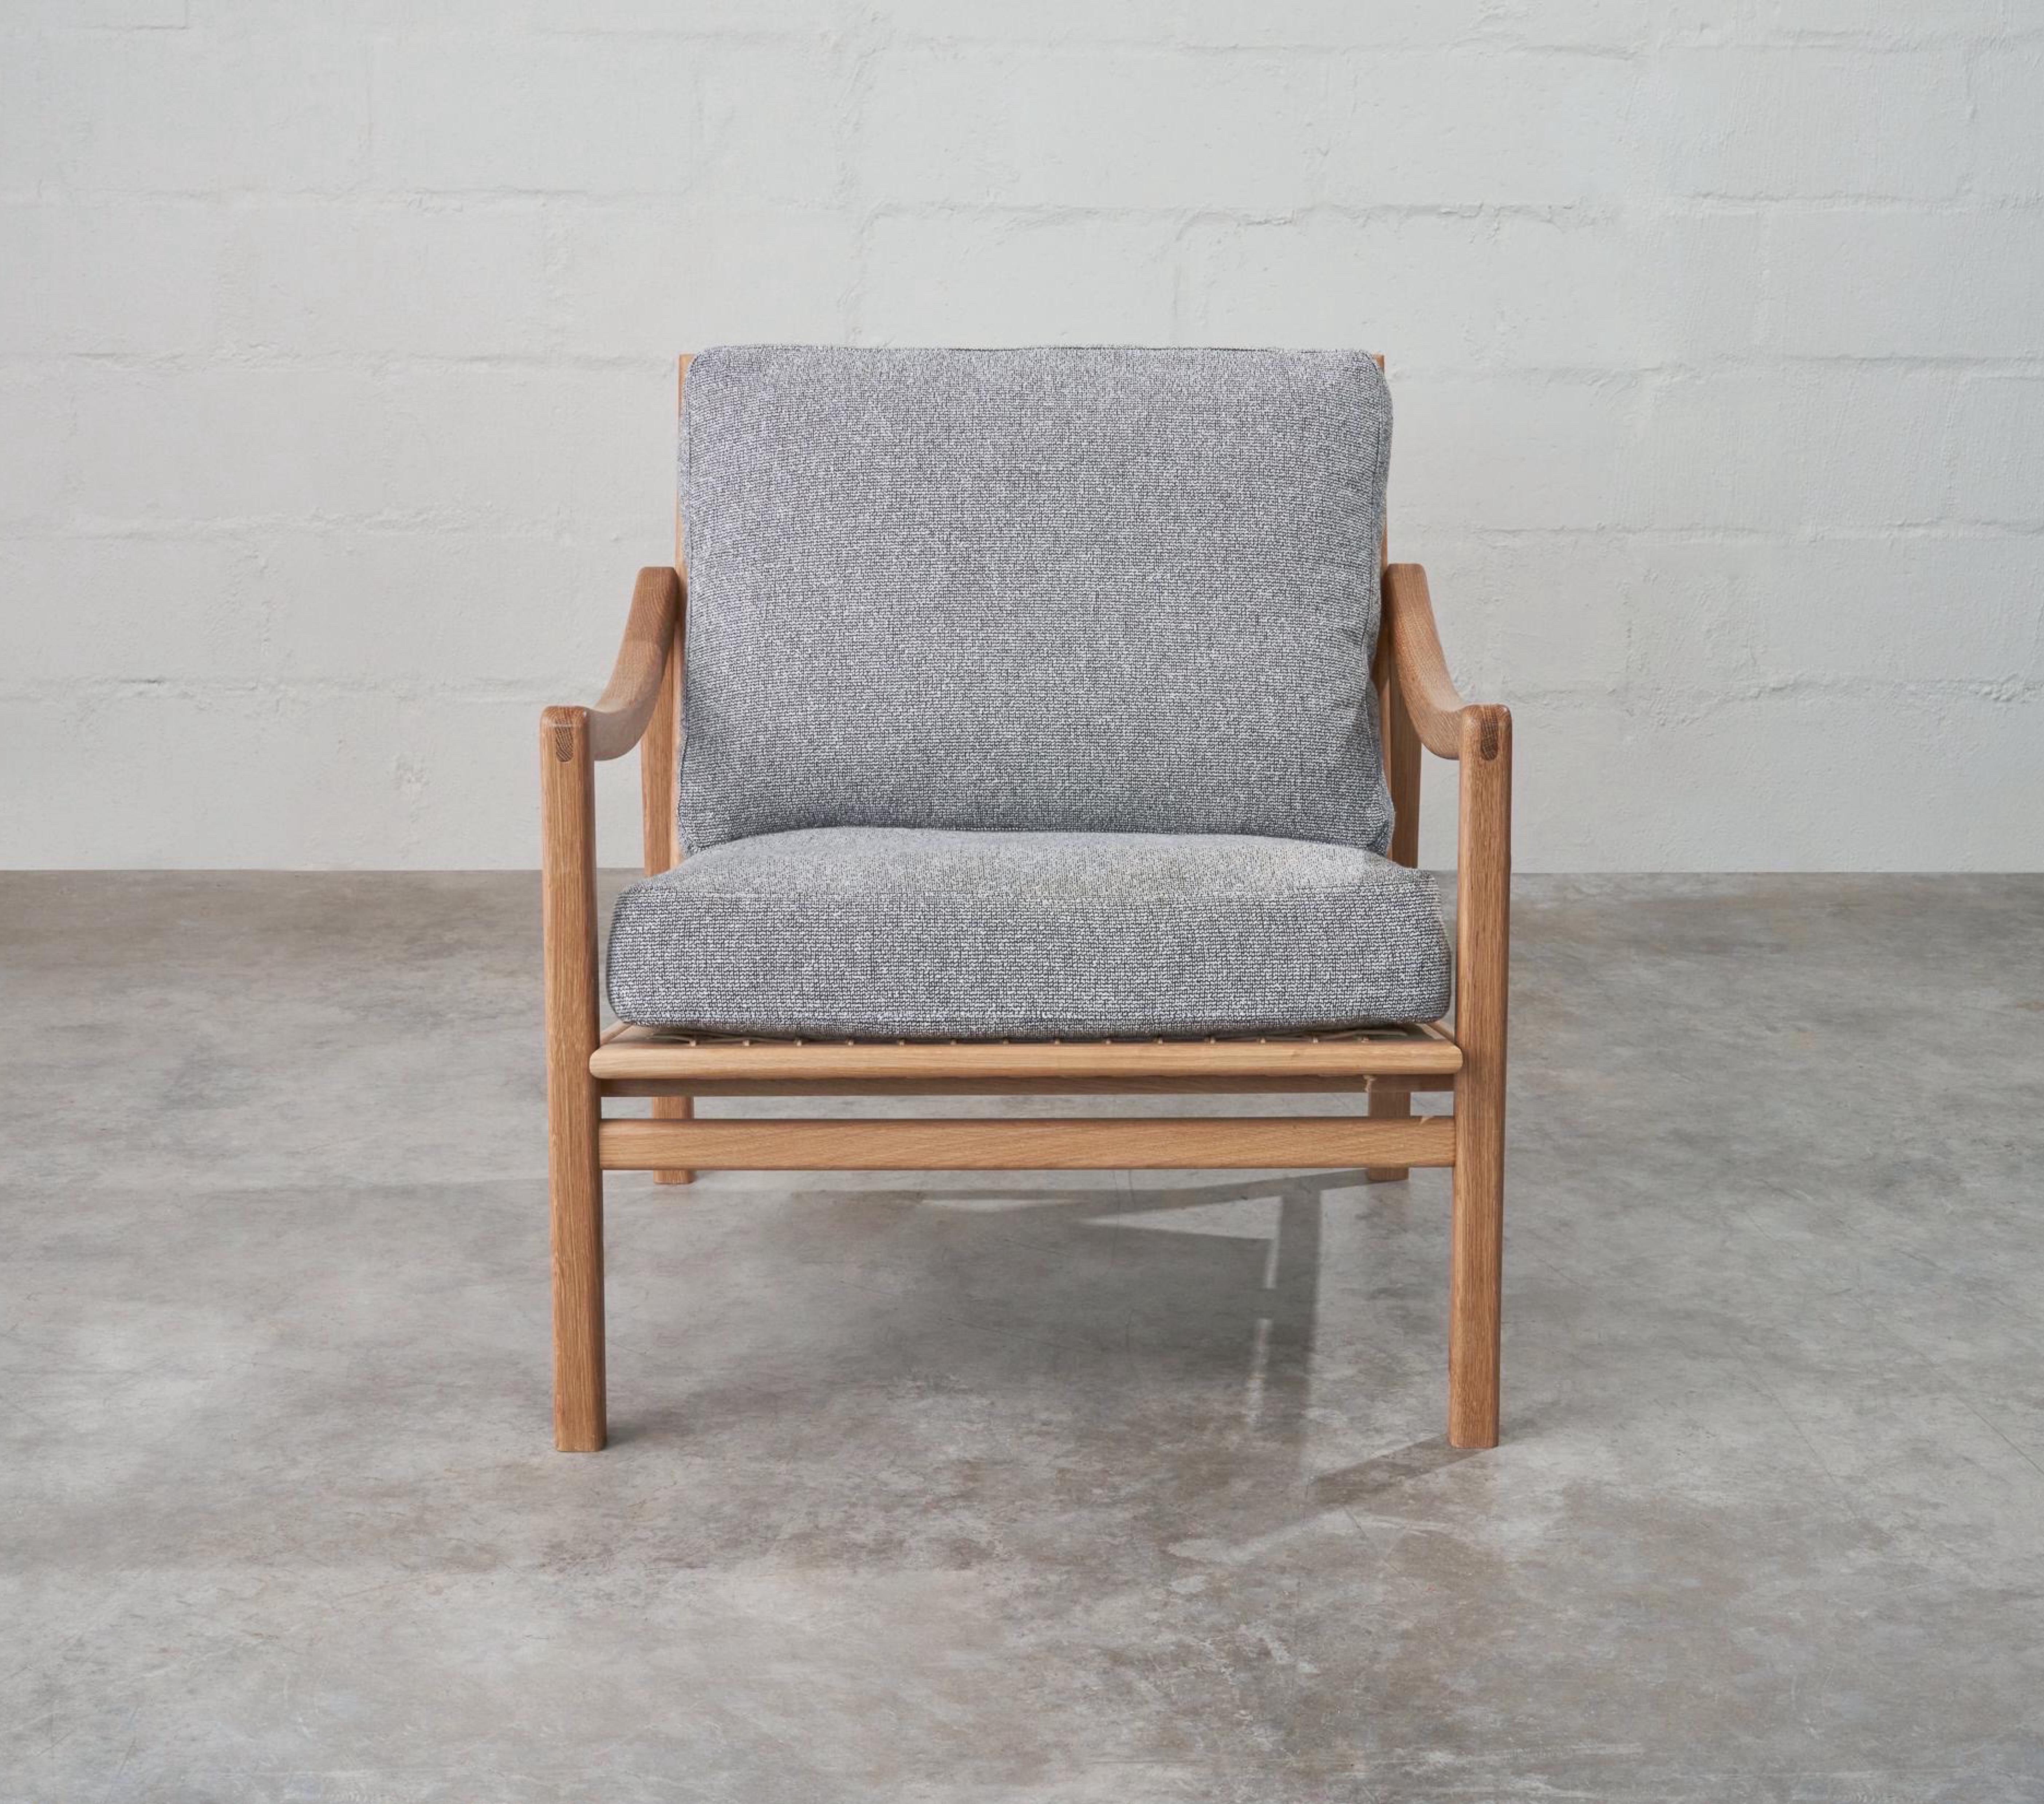 The Kalm chair’s proportions were especially designed to welcome cross-legged seating and long hours of reading or conversation. Clean lines alongside the relaxed armrests exude a casual elegance that is deeply comforting. The chair is made form